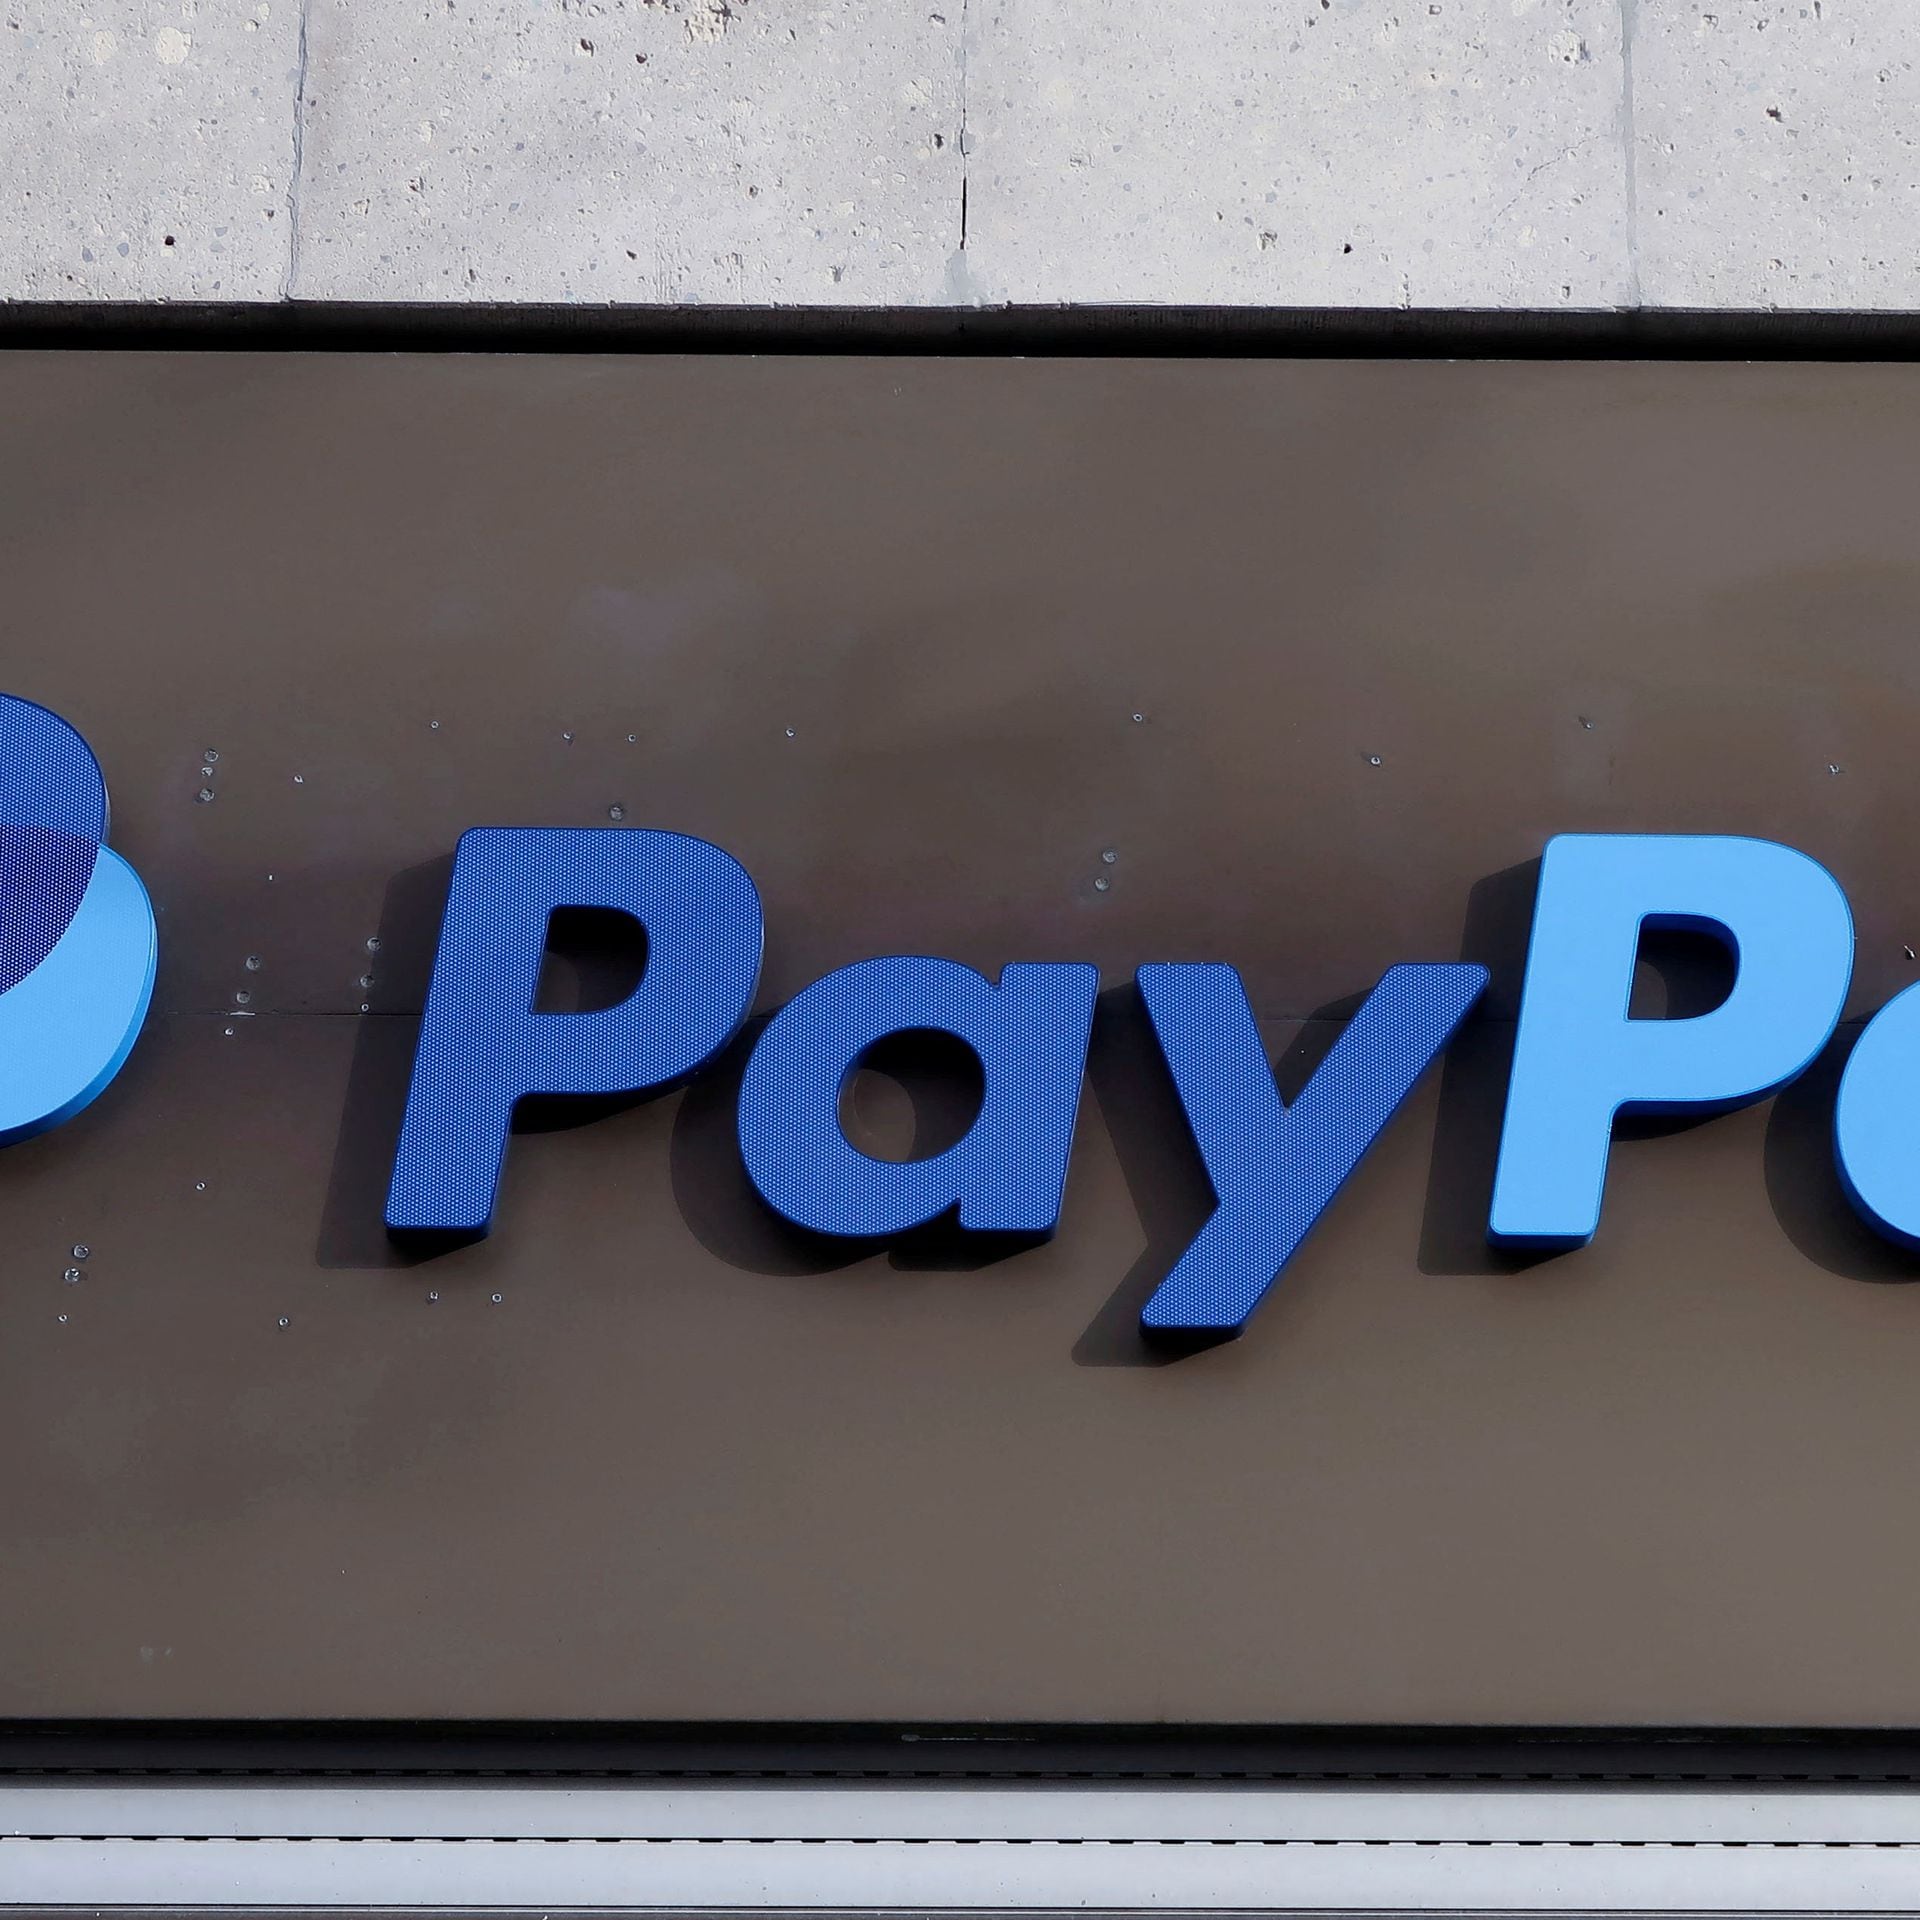 Bitcoin up as market digests PayPal stablecoin launch